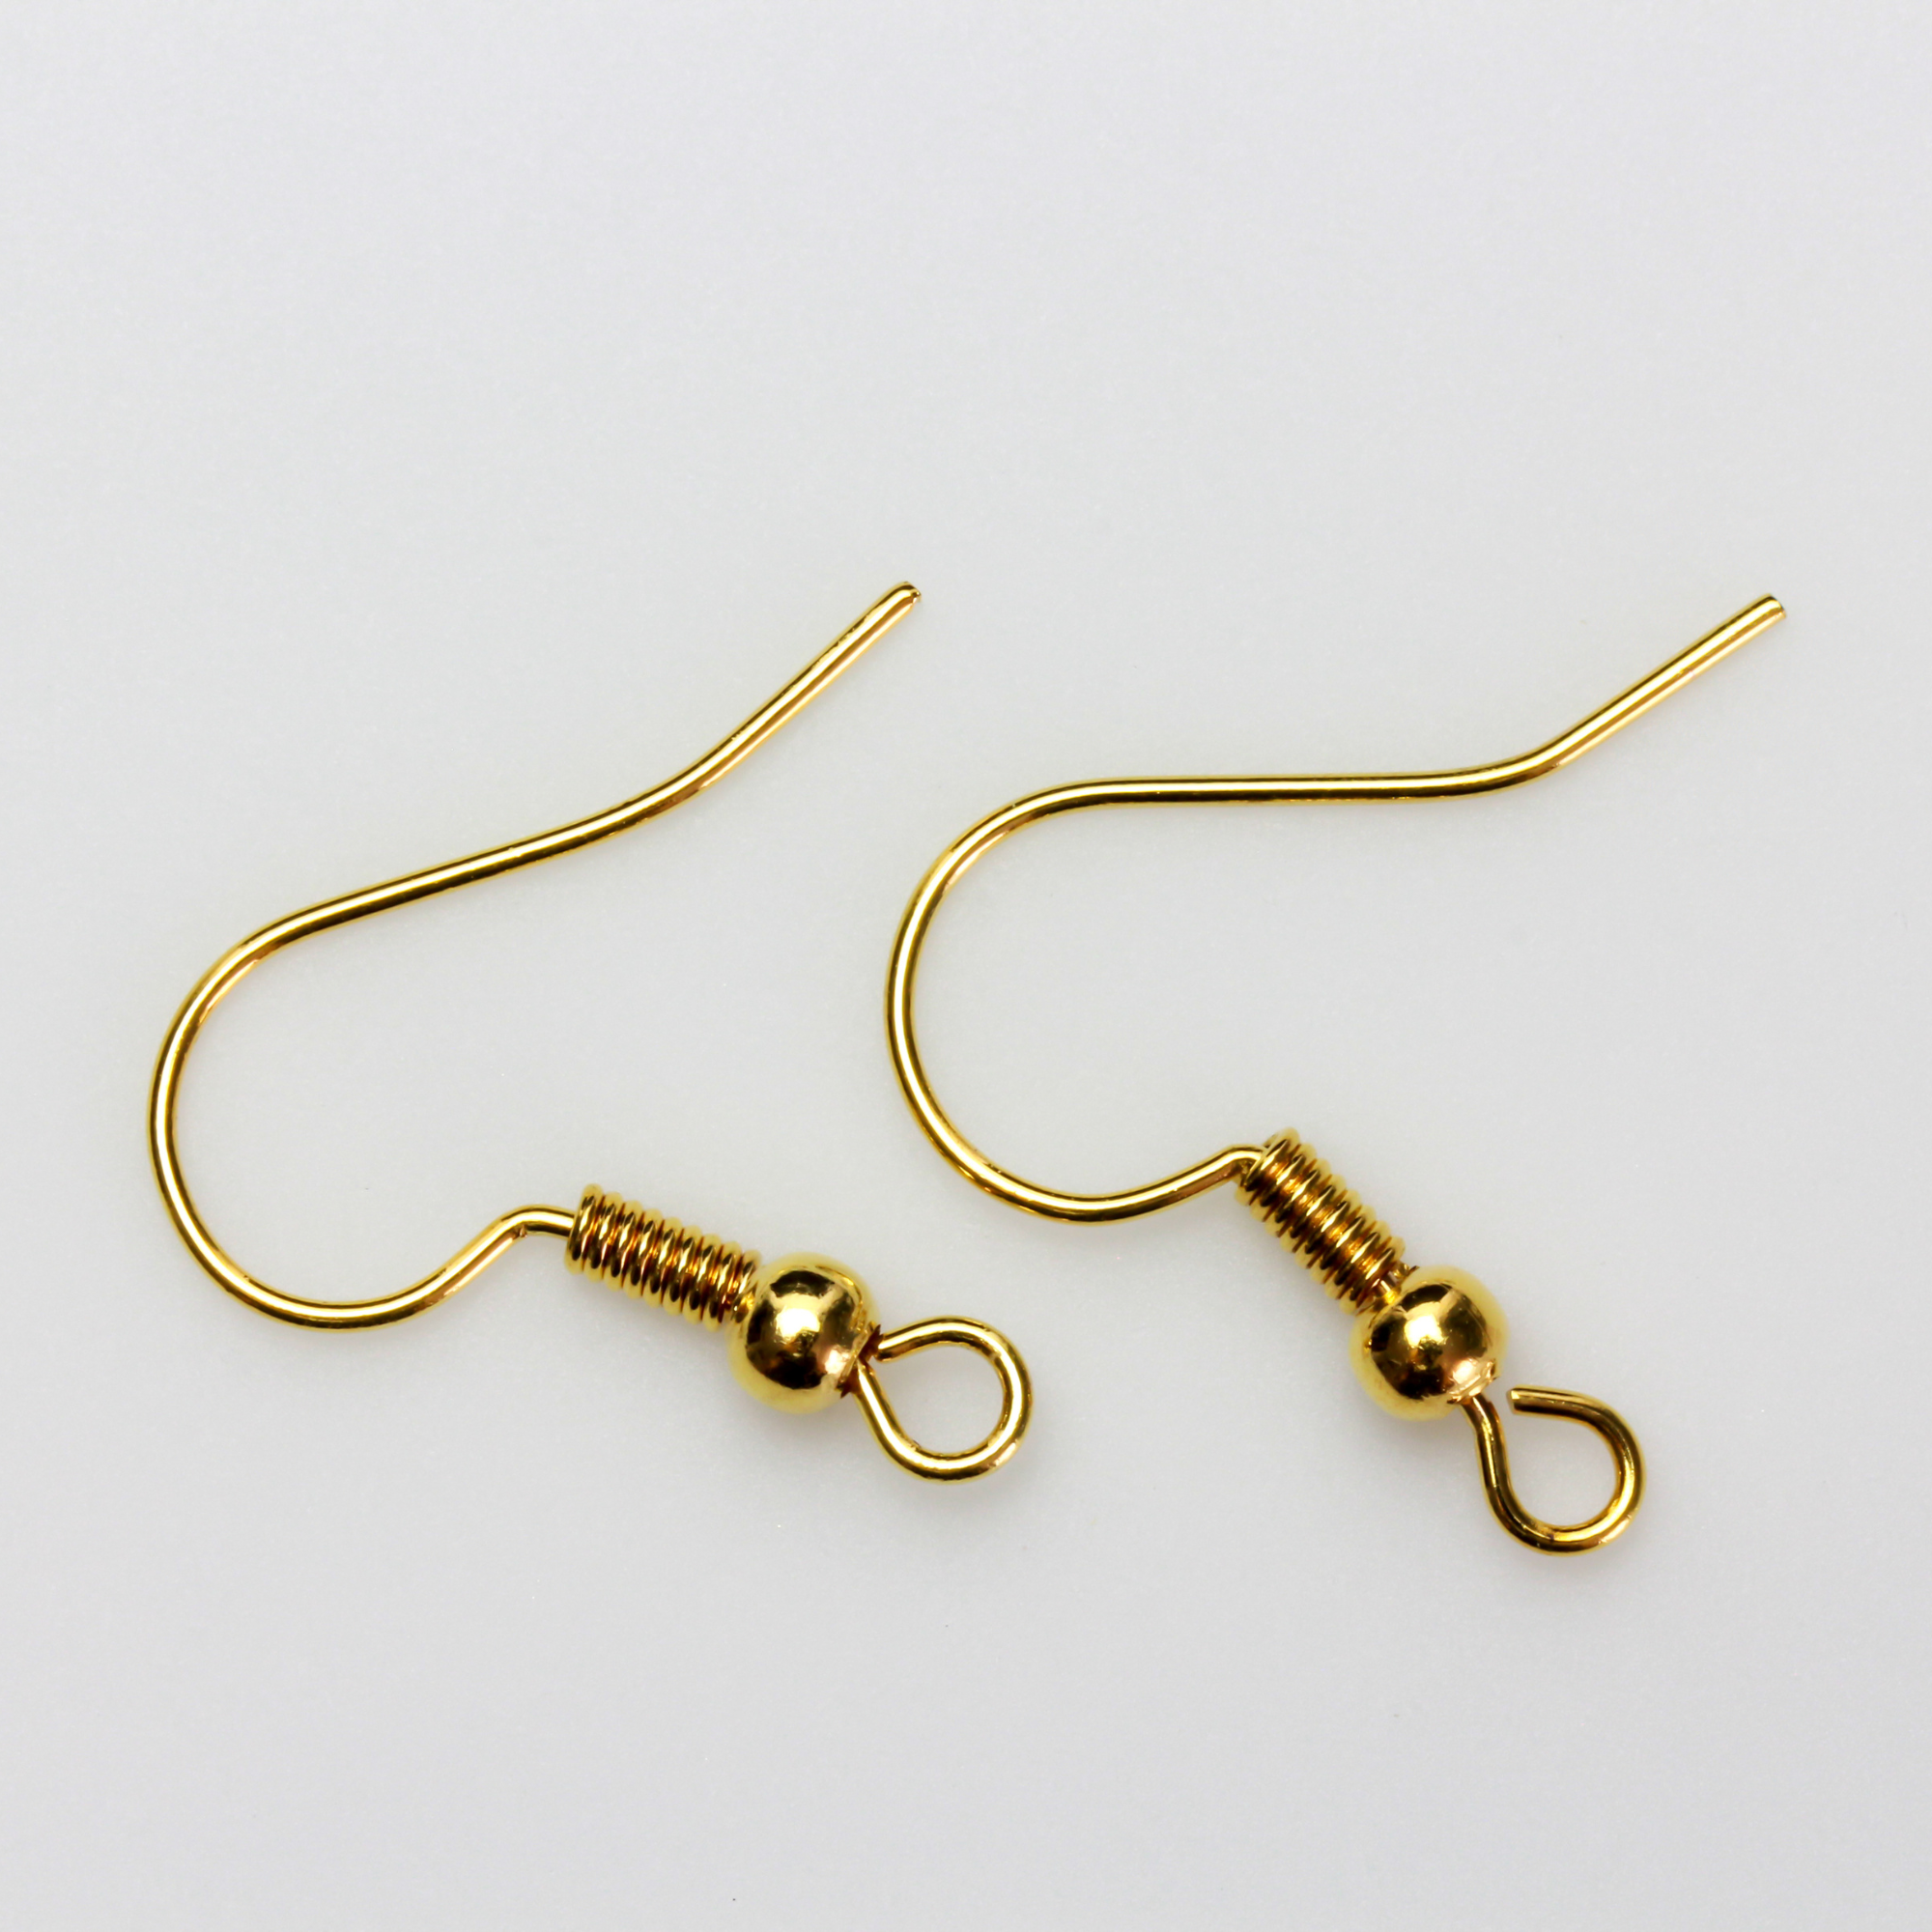 Brass earring hooks with a horizontal loop and a shiny golden finish, 21 gauge wire. Sold in packages of 30 hooks (15 pairs).